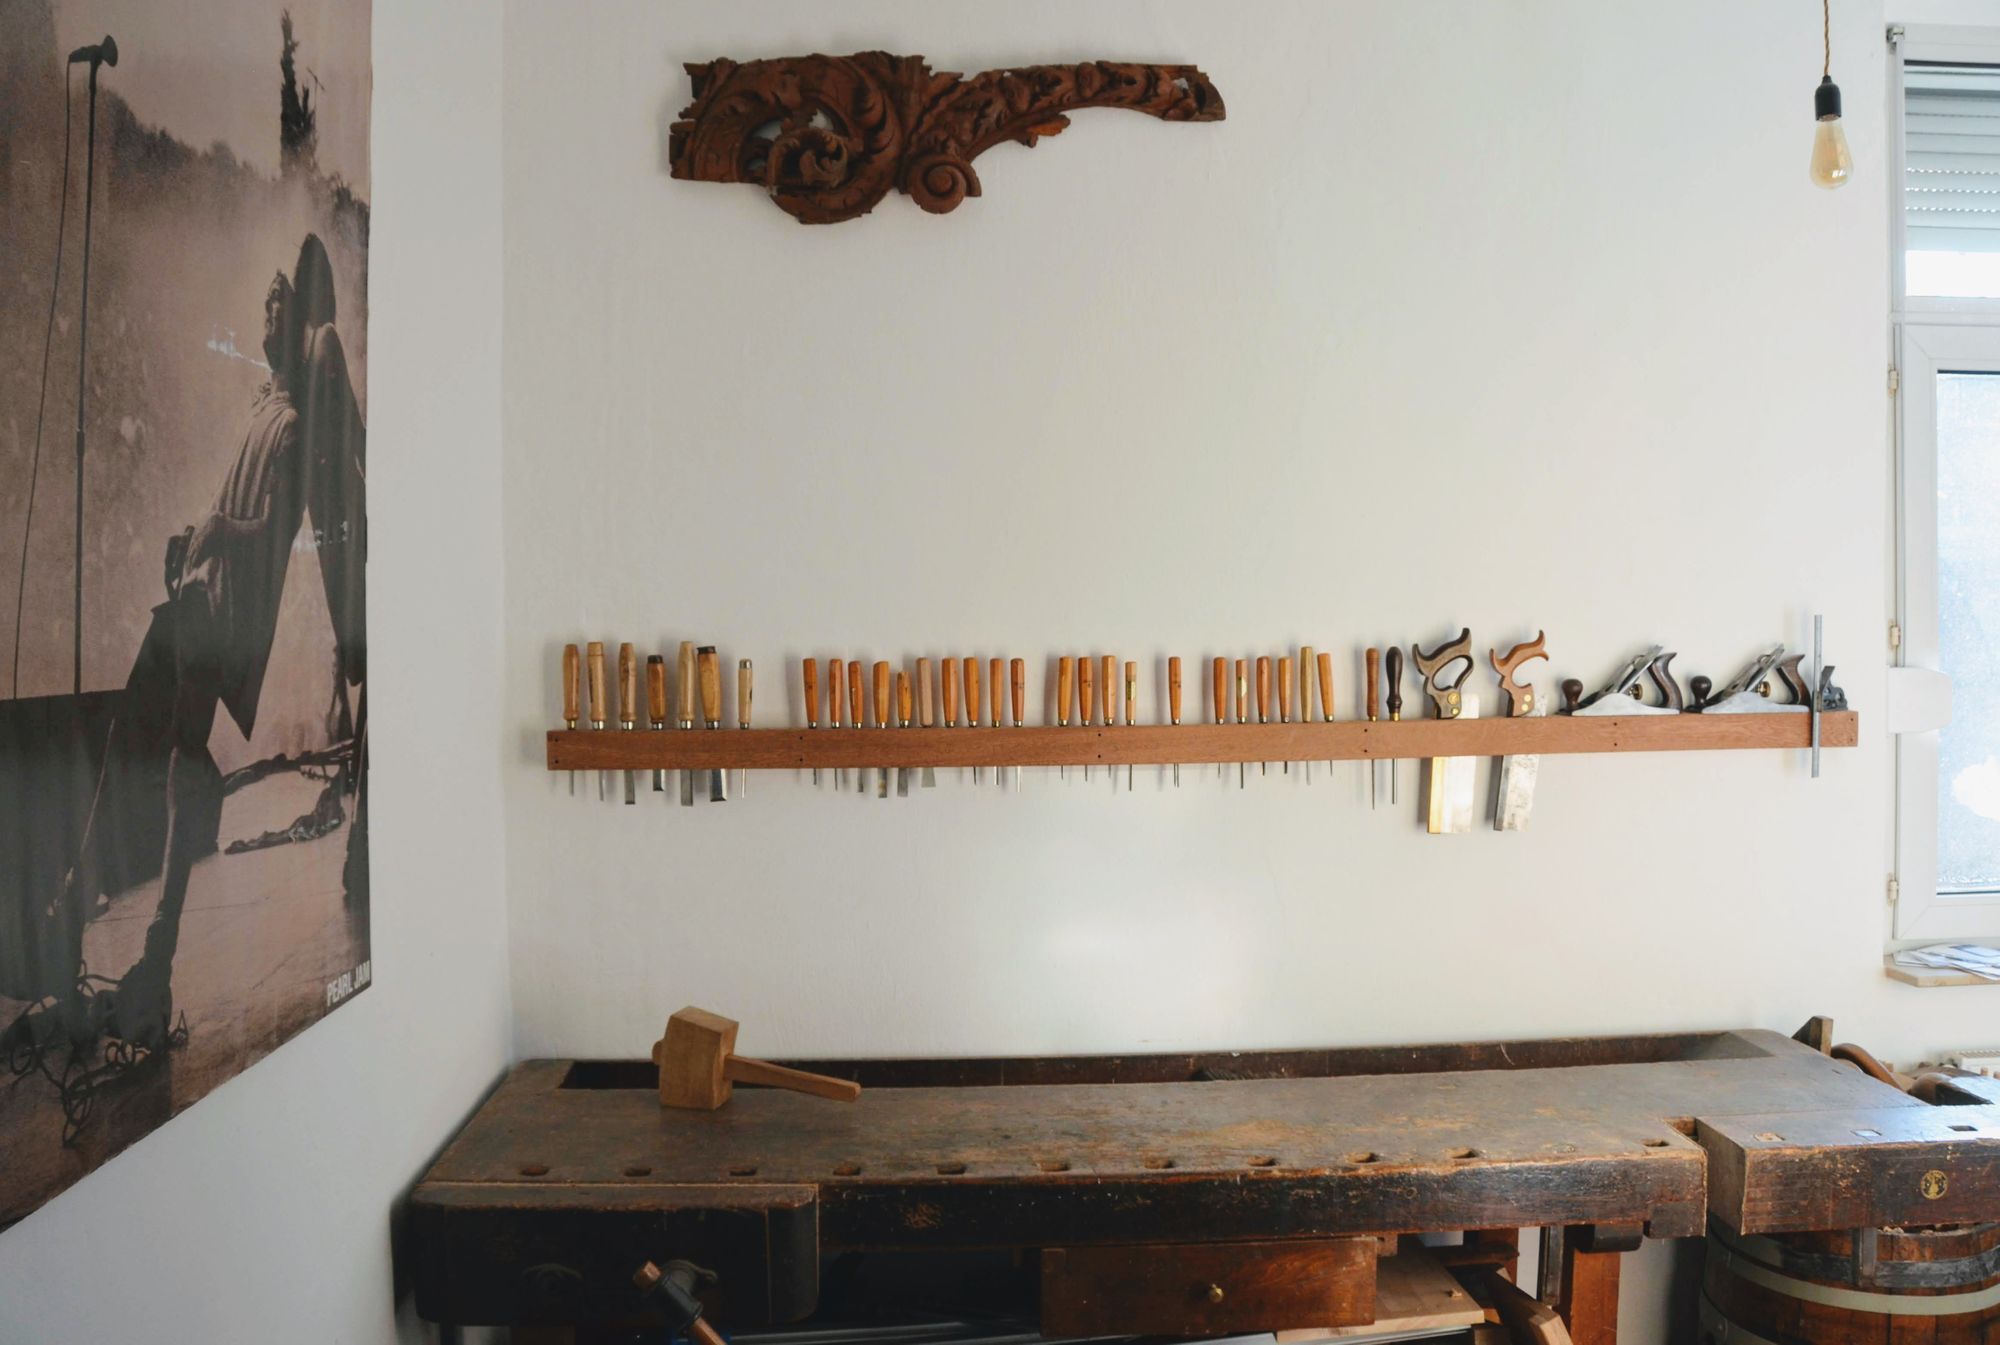 Hand tool rack with French cleat